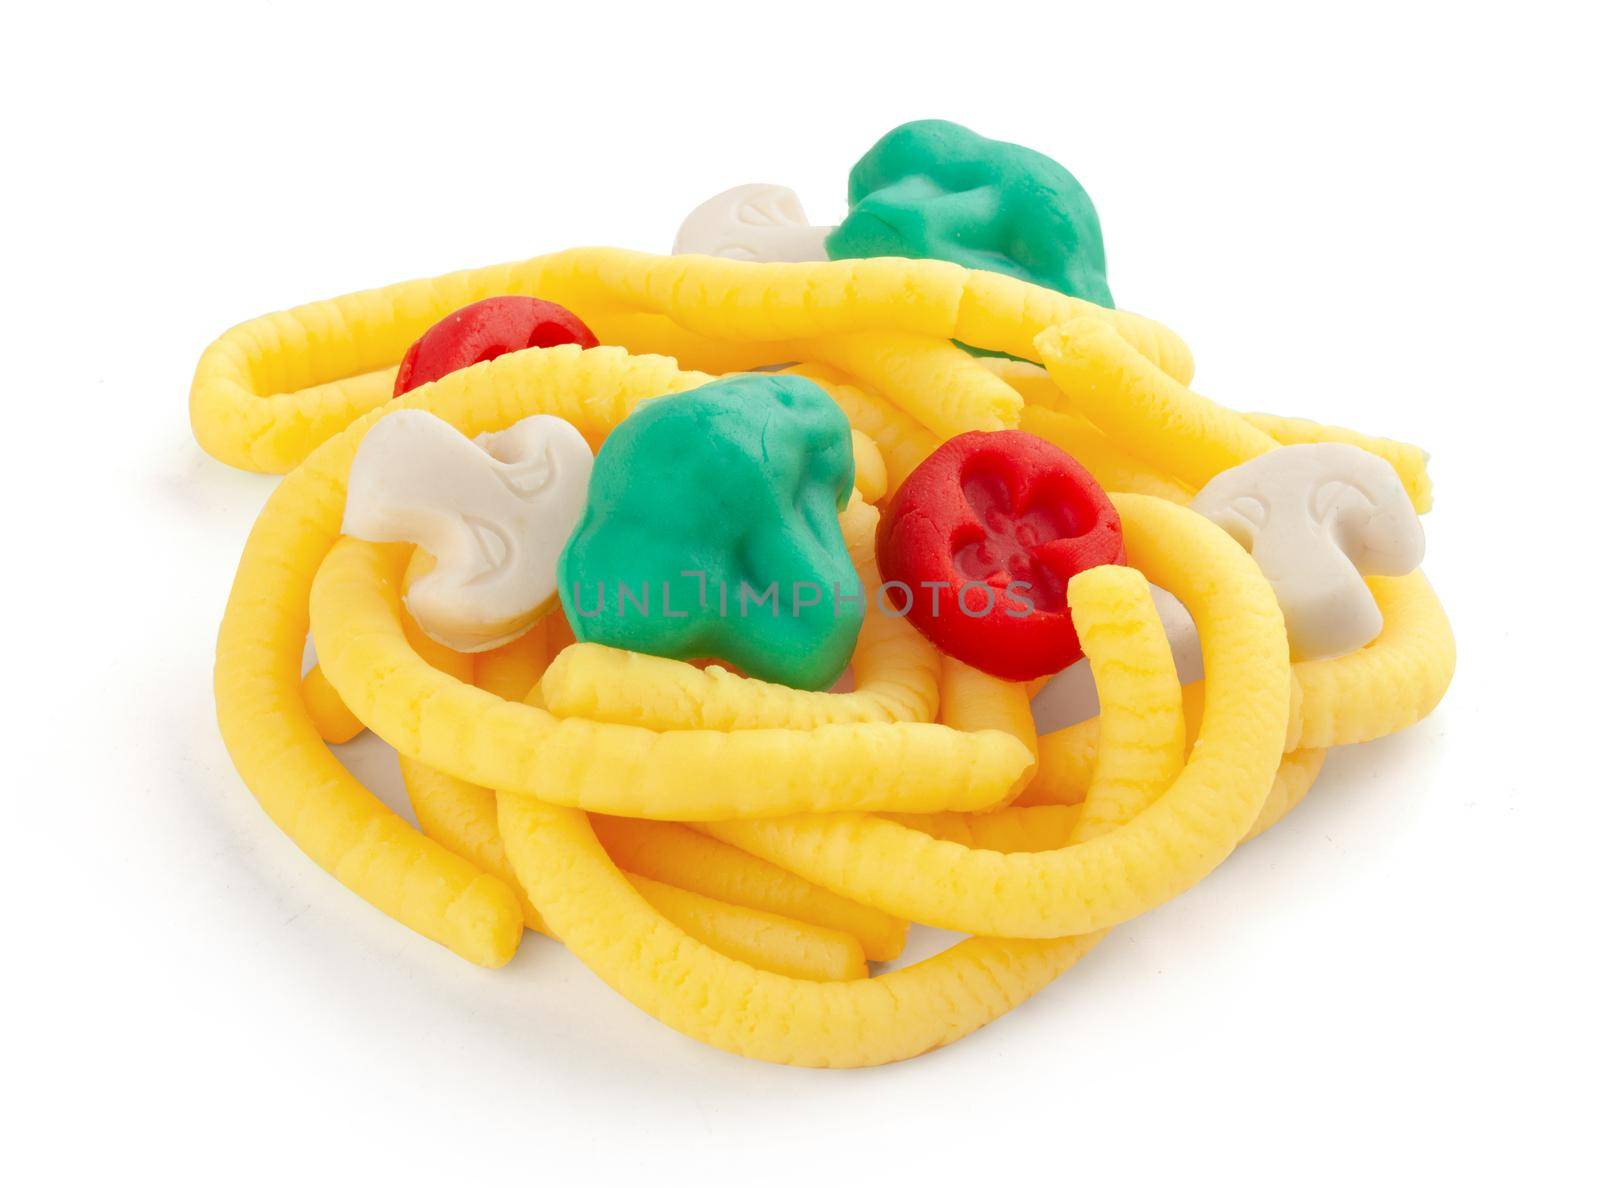 Isolated plasticine pasta with vegetables by Angorius